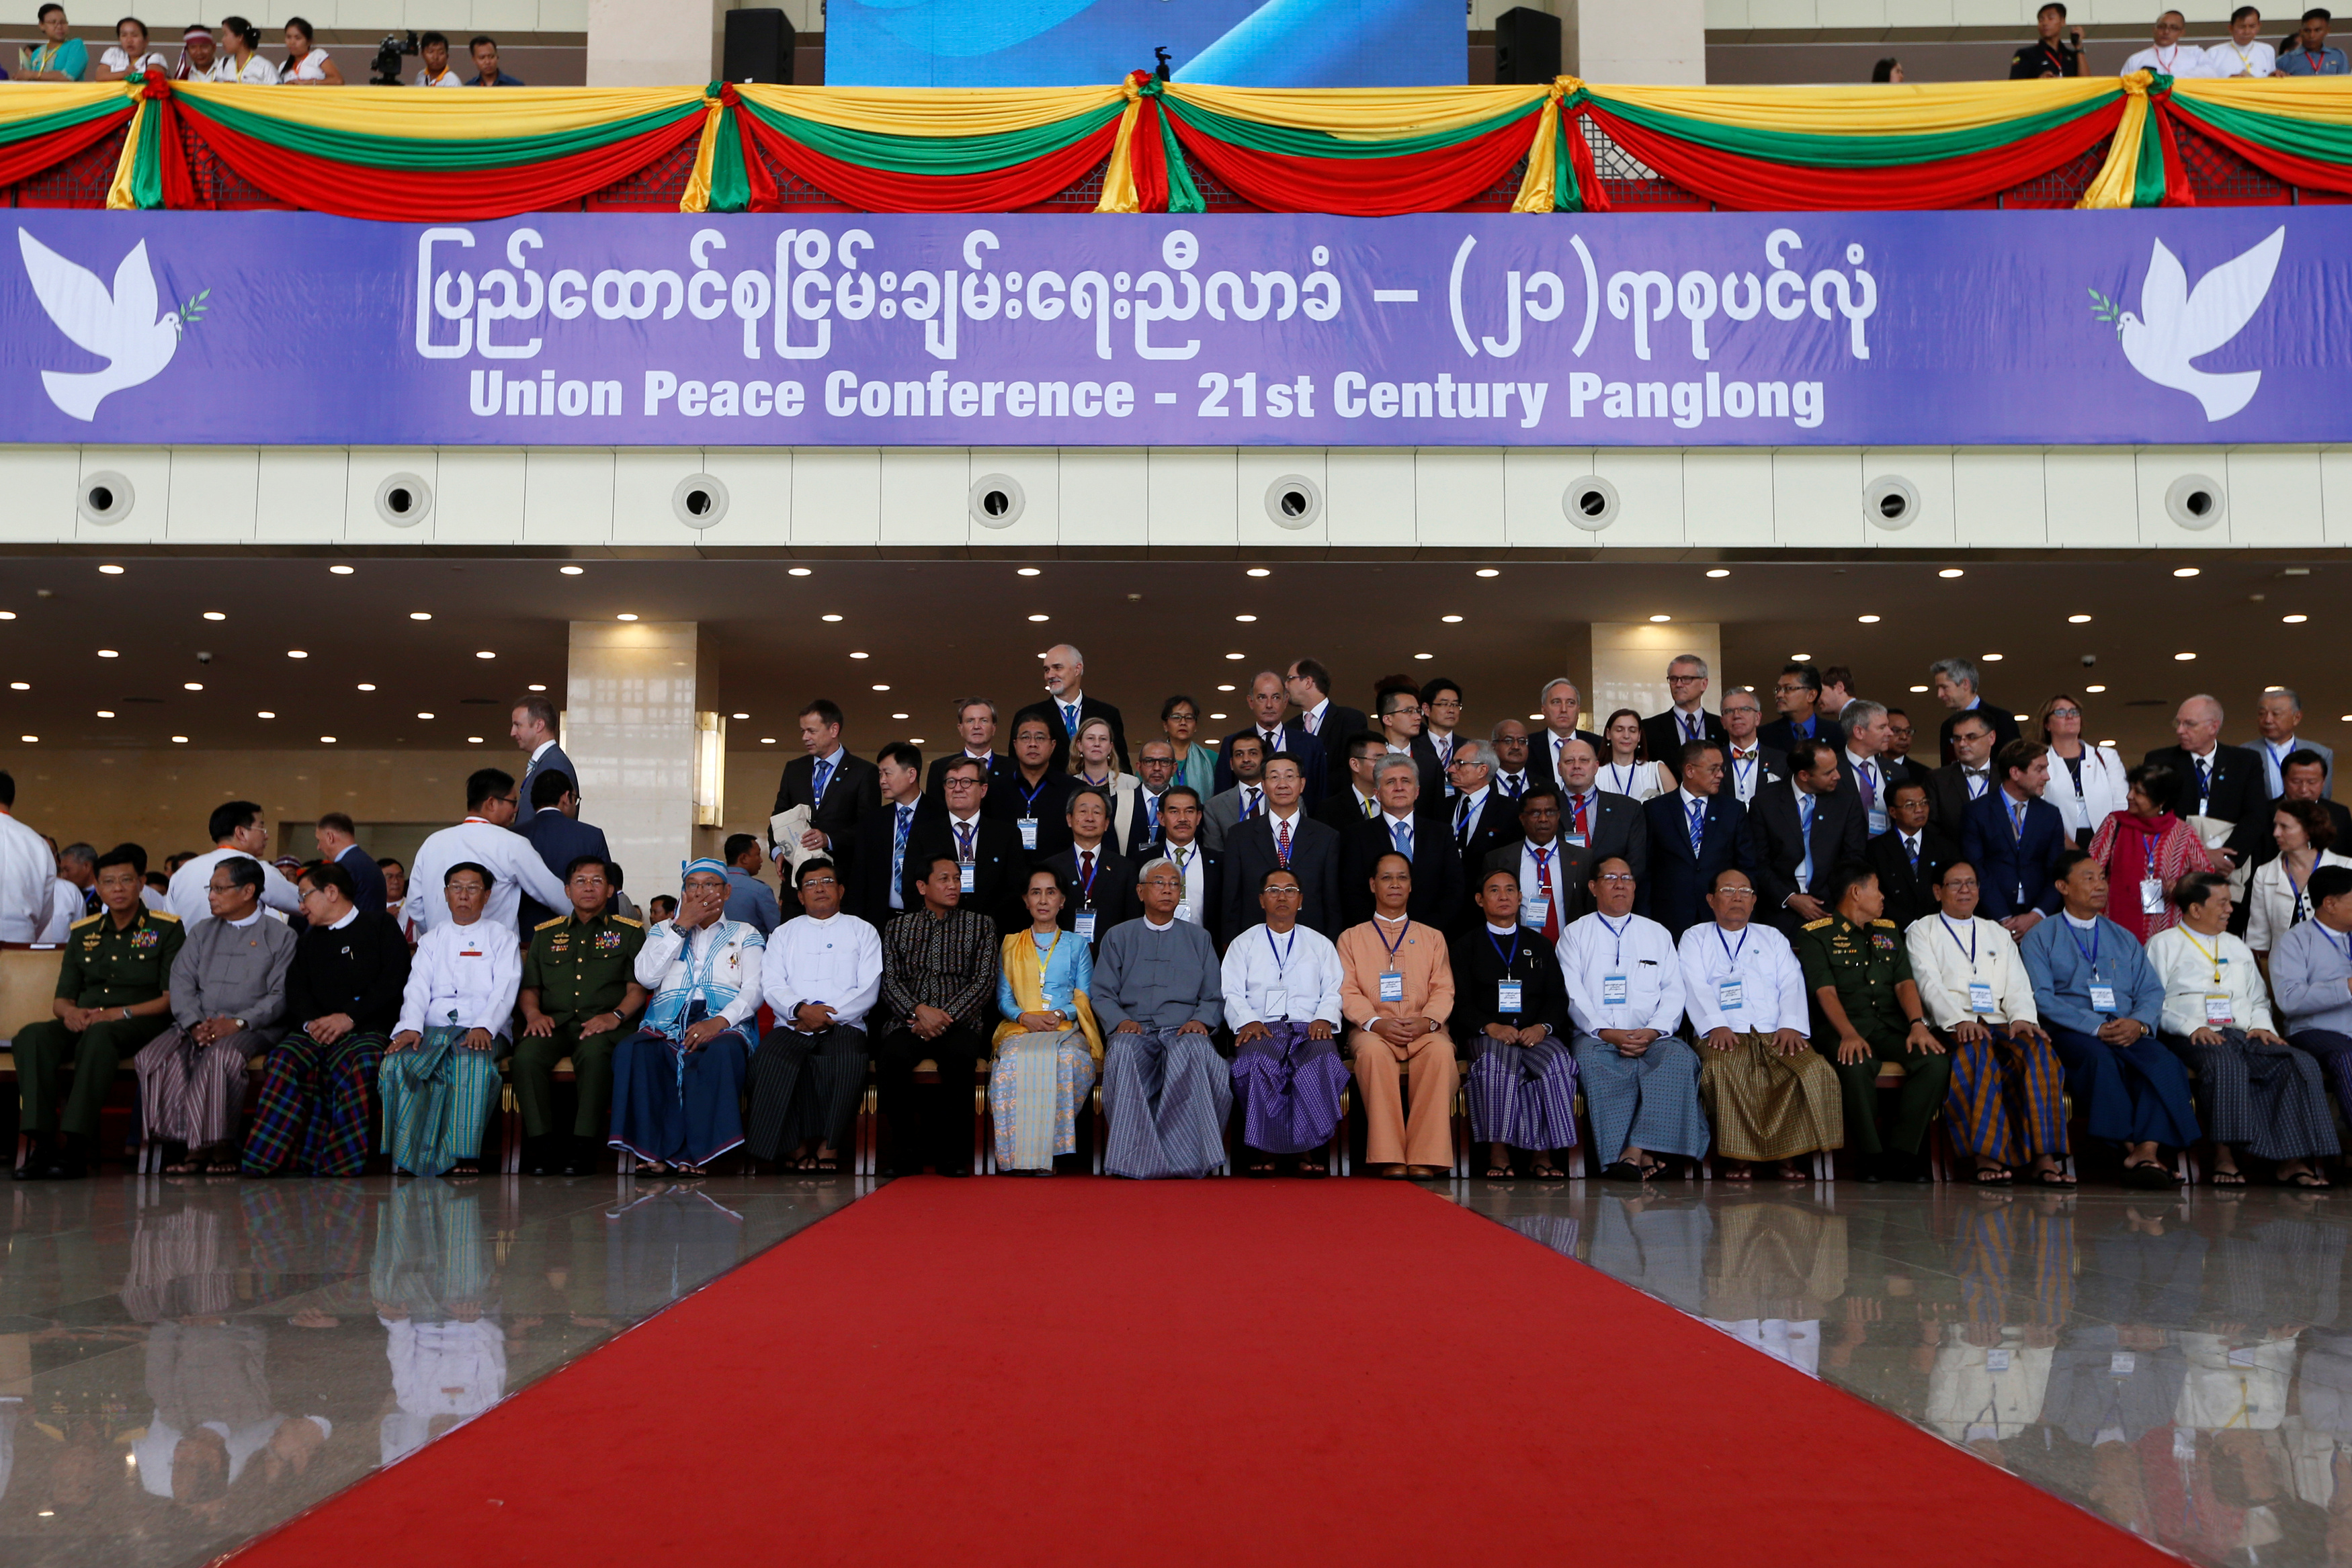 Post-Panglong, peace process challenges remain